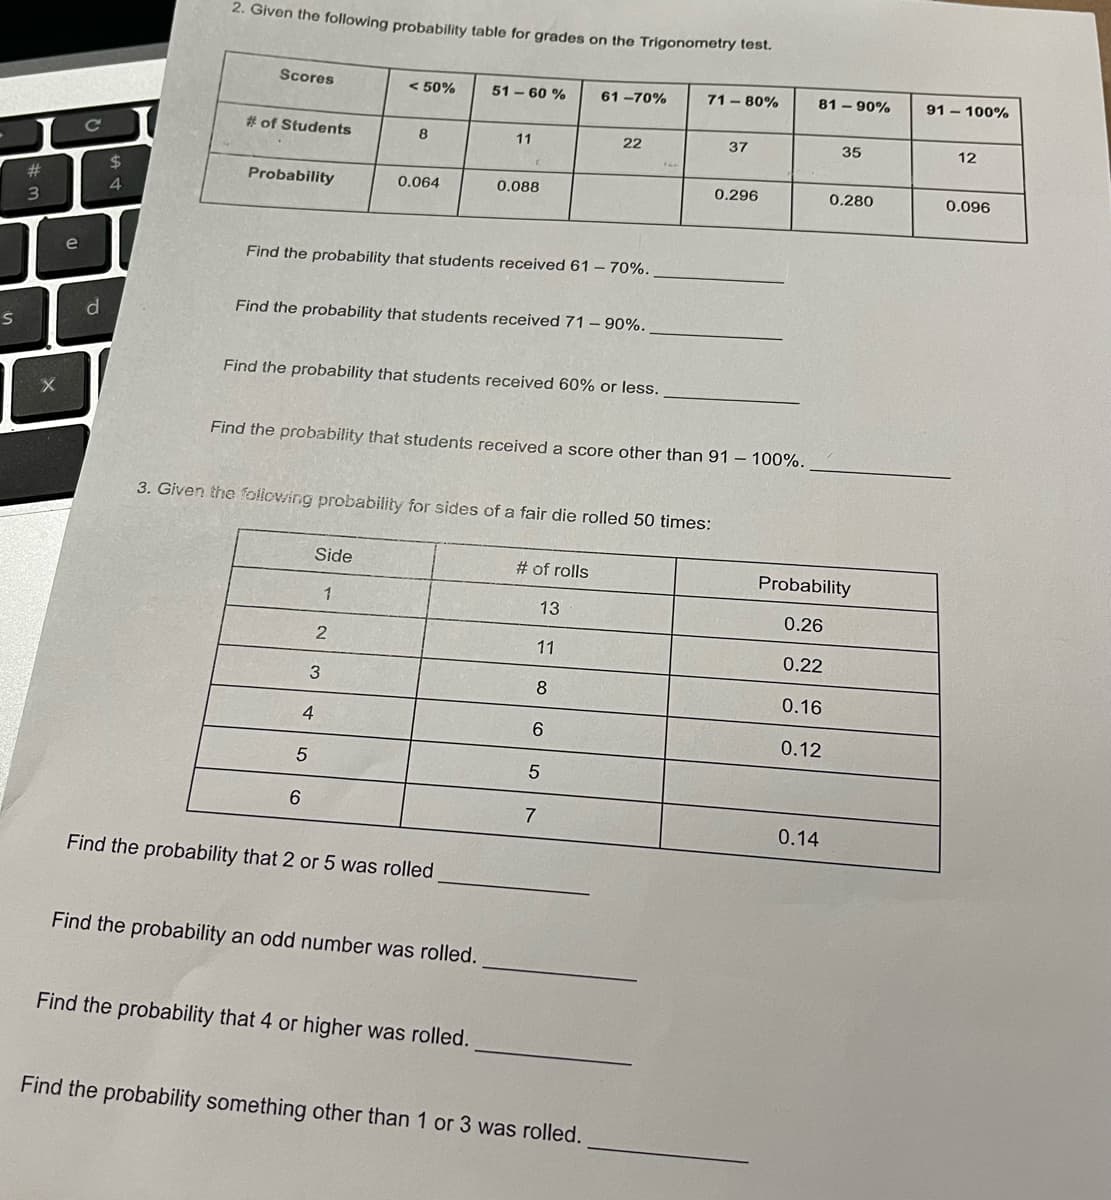 S
#
3
X
e
с
d
$
4
2. Given the following probability table for grades on the Trigonometry test.
Scores
# of Students
Probability
< 50%
4
8
5
6
0.064
Find the probability that students received 61-70%.
Side
1
3
Find the probability that students received 71-90%.
2
Find the probability that students received 60% or less.
51-60%
11
0.088
Find the probability that students received a score other than 91 - 100%.
3. Given the following probability for sides of a fair die rolled 50 times:
Find the probability that 2 or 5 was rolled
Find the probability an odd number was rolled.
Find the probability that 4 or higher was rolled.
61-70%
# of rolls
13
11
8
22
6
5
7
Find the probability something other than 1 or 3 was rolled.
71 - 80%
37
0.296
81-90%
0.16
0.12
35
Probability
0.26
0.22
0.14
0.280
91 - 100%
12
0.096